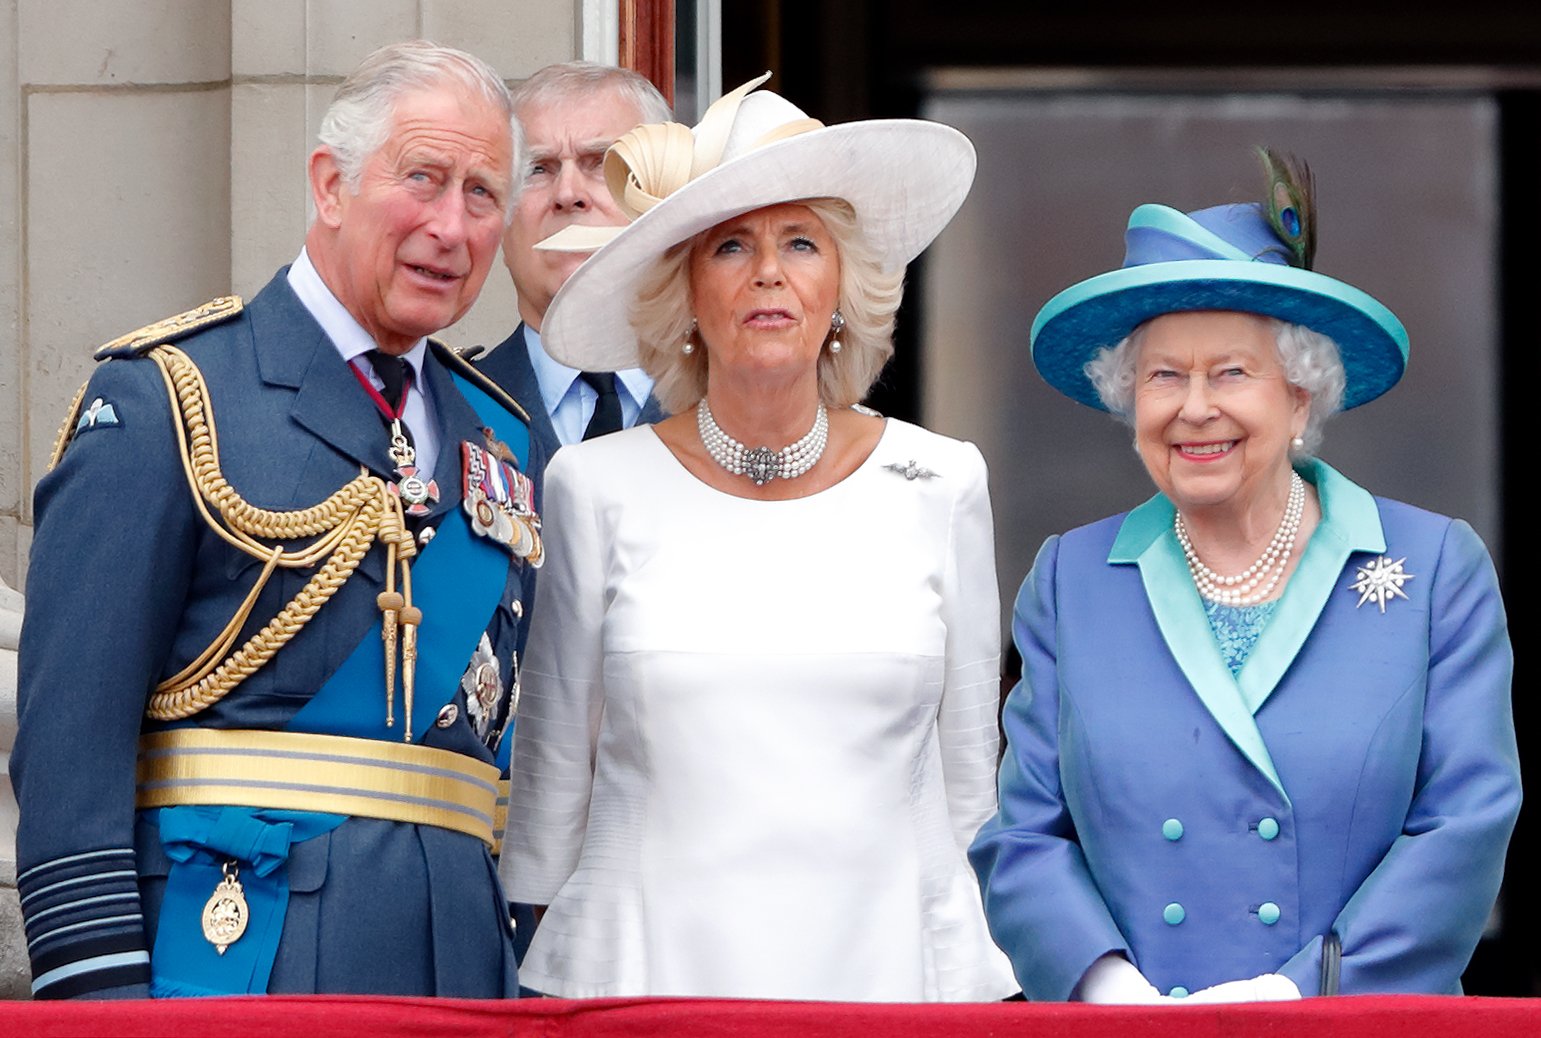 Prince Charles, Camilla Parker-Bowles and Queen Elizabeth II watch a flypast to mark the centenary of the Royal Air Force from the balcony of Buckingham Palace on July 10, 2018 in London, England. | Source: Getty Images